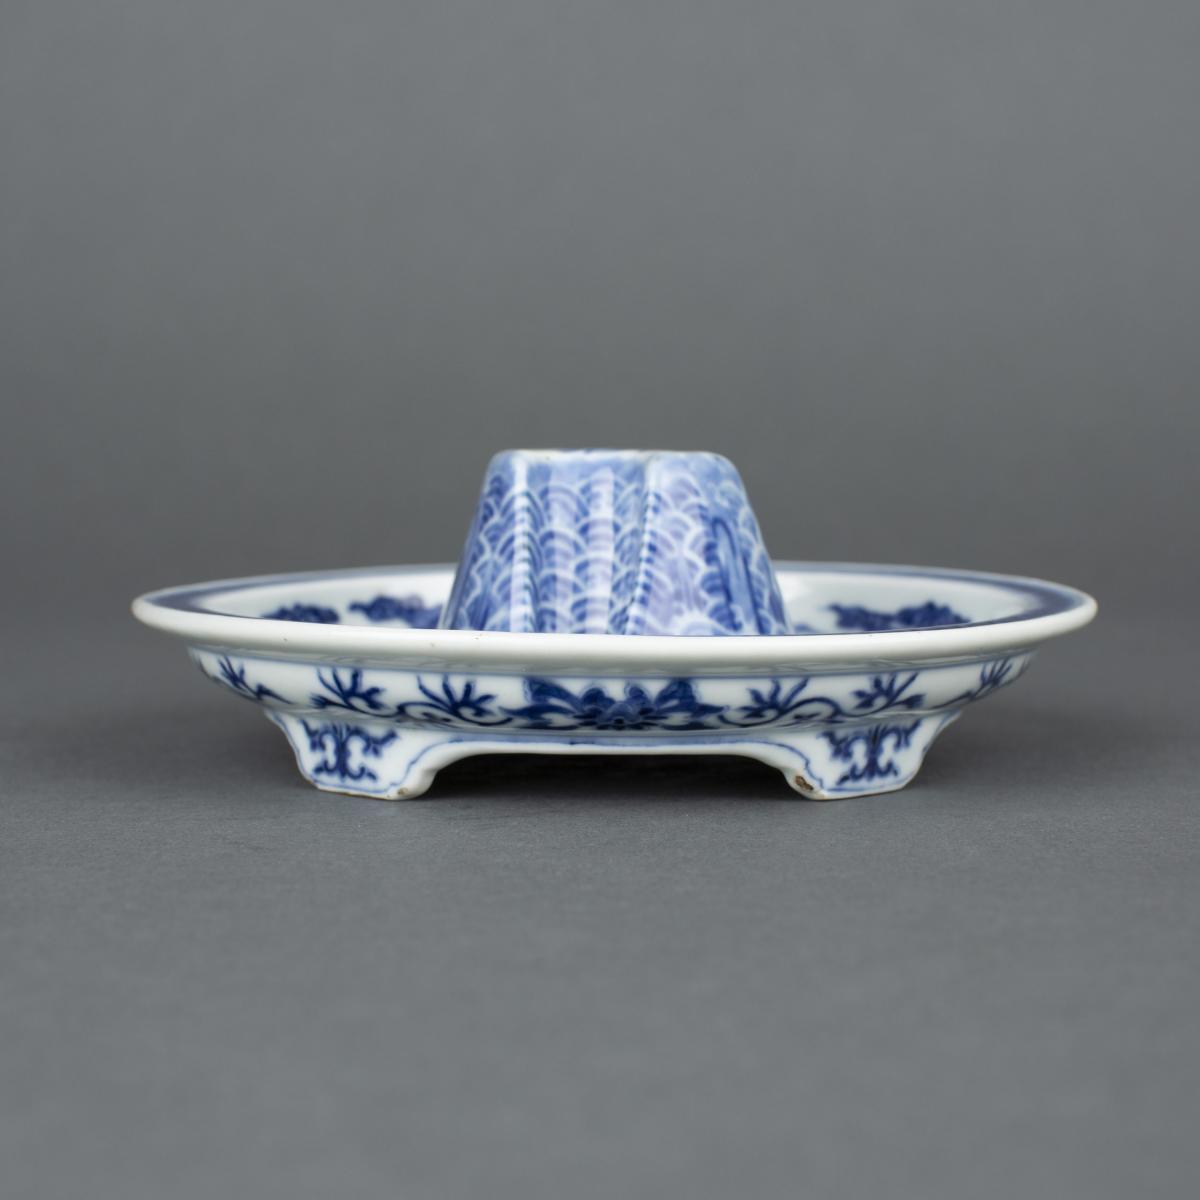 Chinese imperial porcelain blue and white jue stand, 1736-1795